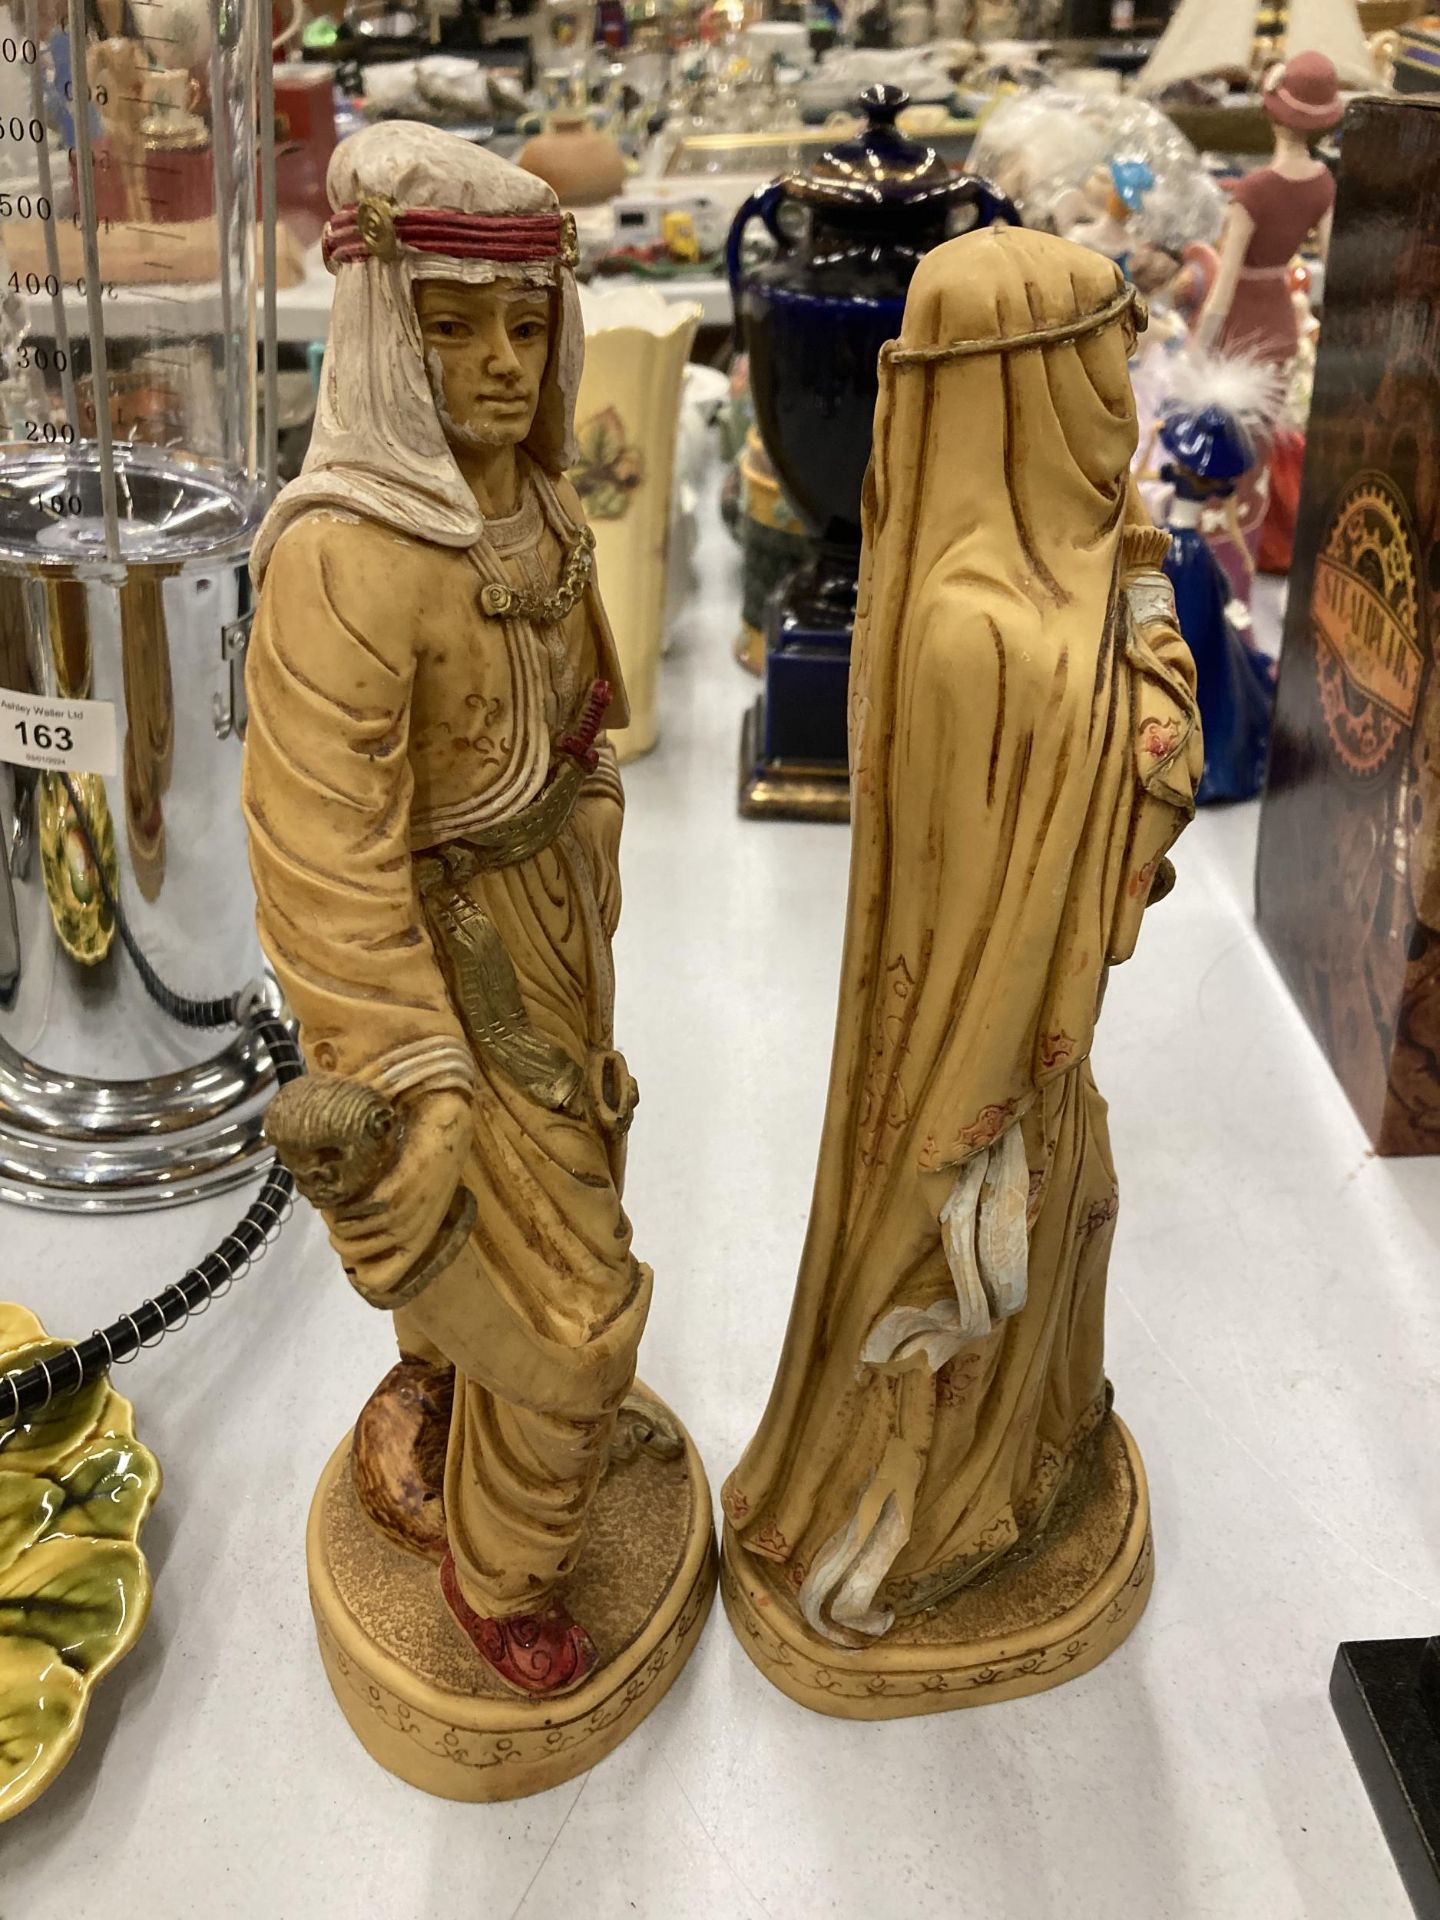 TWO VERY HEAVY SHEIKH AND ARAB LADY FIGURES, HEIGHT 31CM - Image 2 of 3